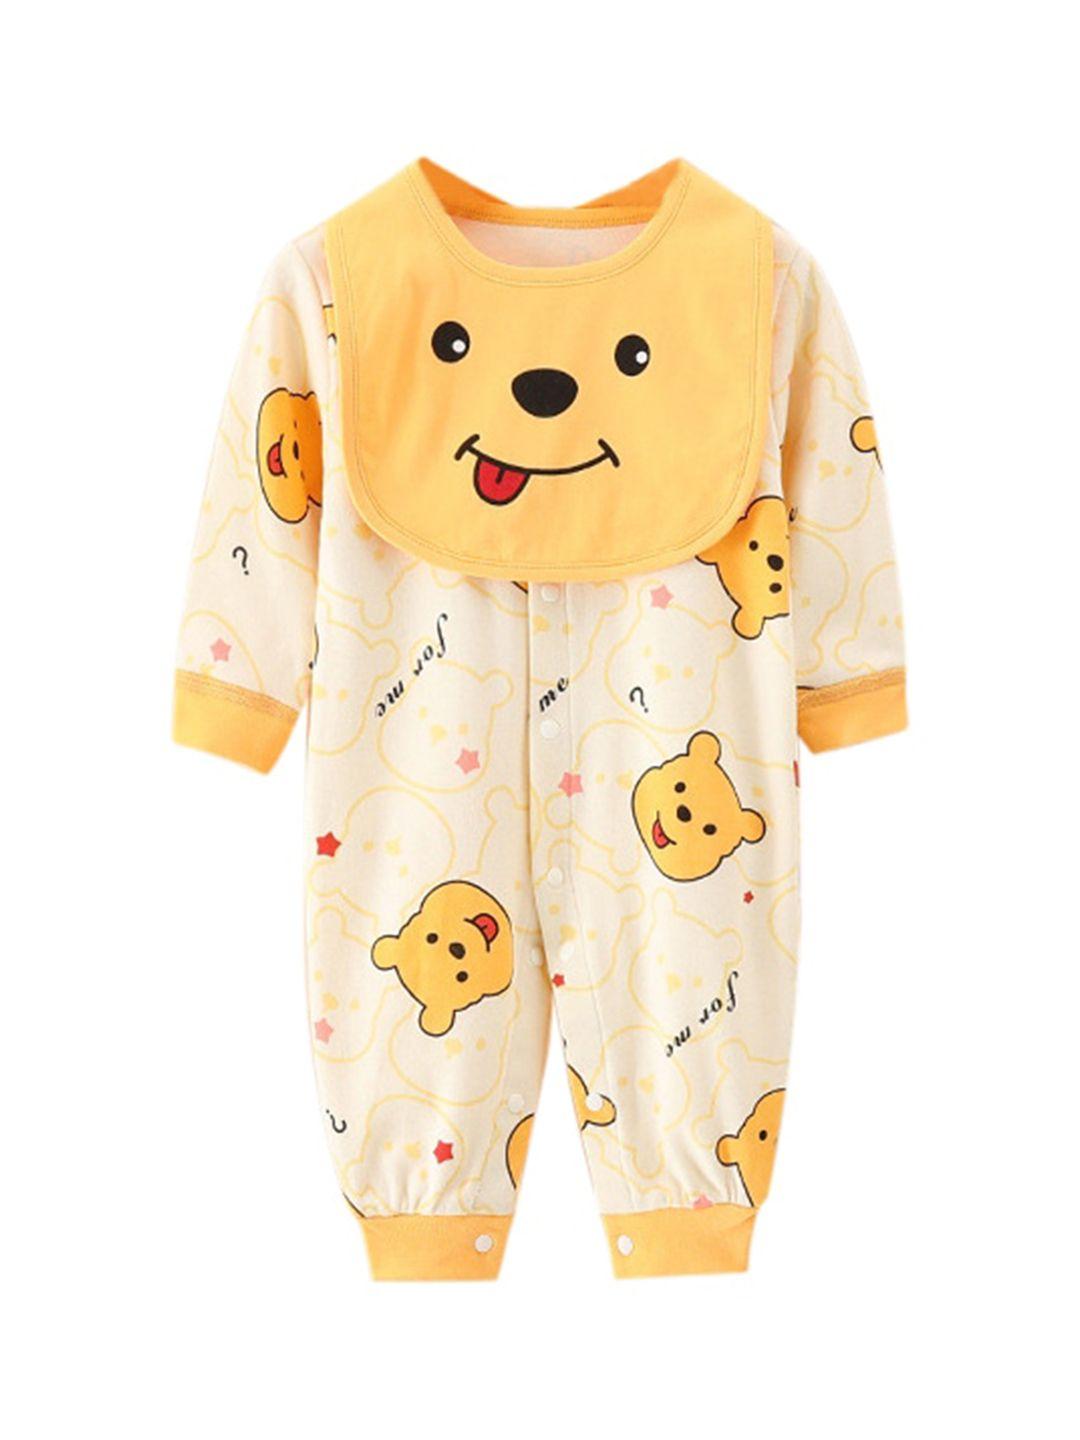 stylecast infant boys yellow graphic printed cotton rompers